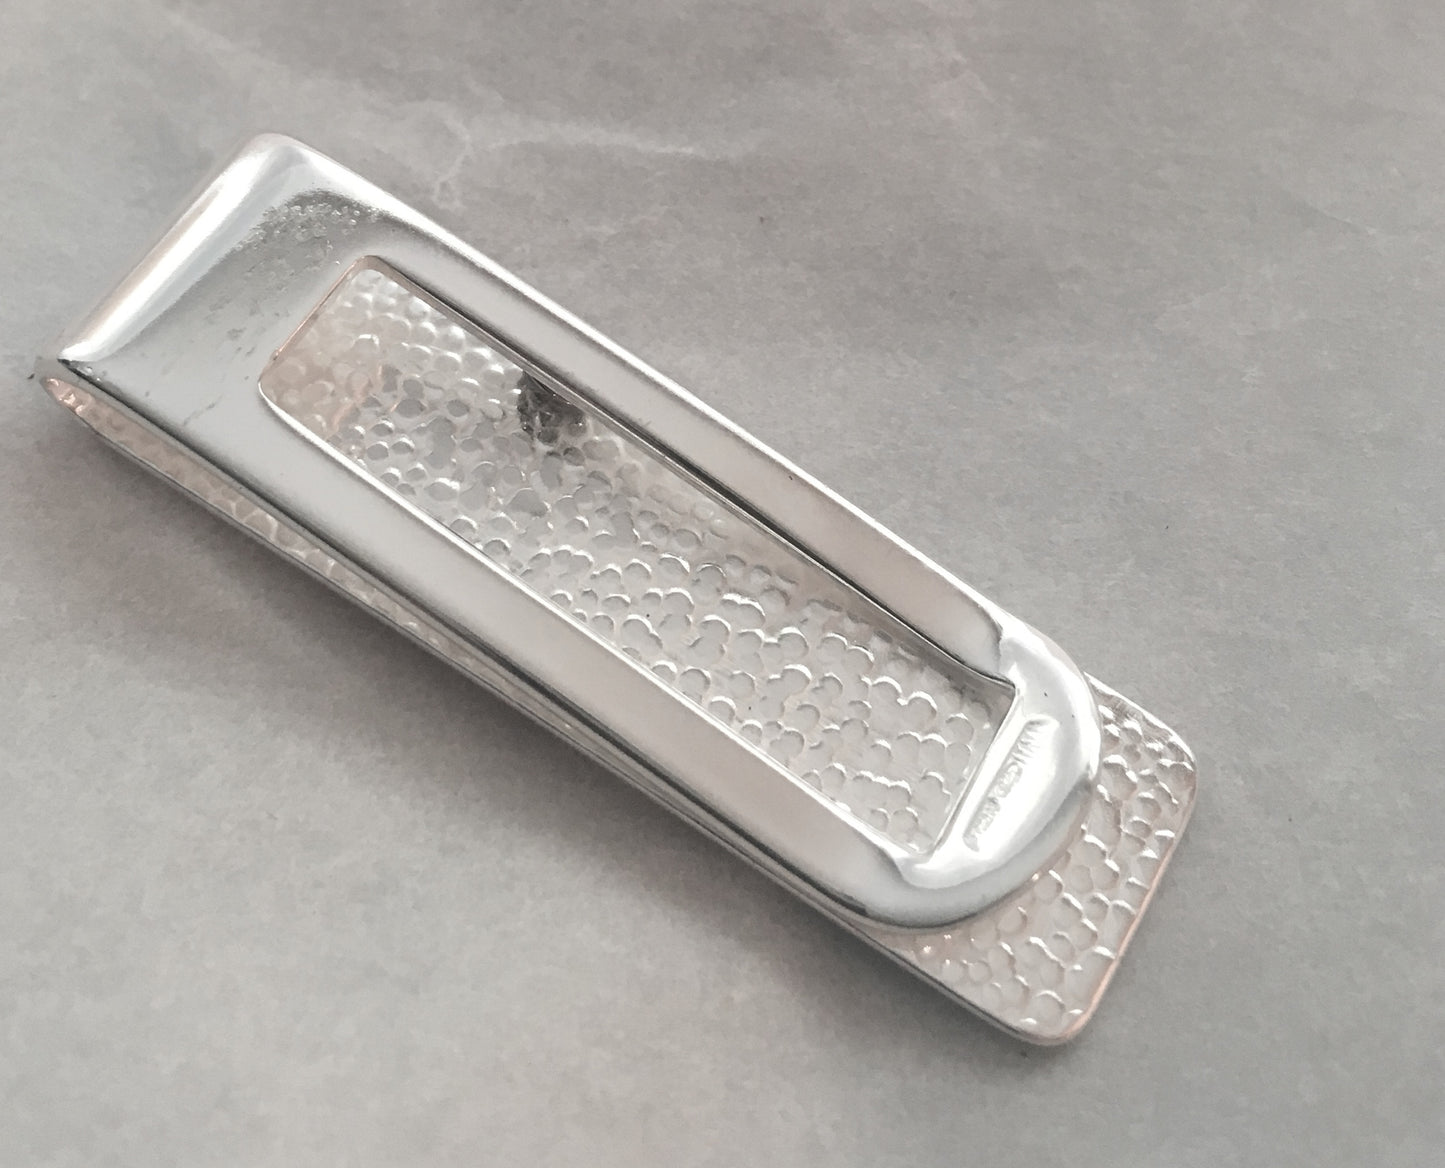 Chef's Sterling Silver Money Clip with Cleaver Knife